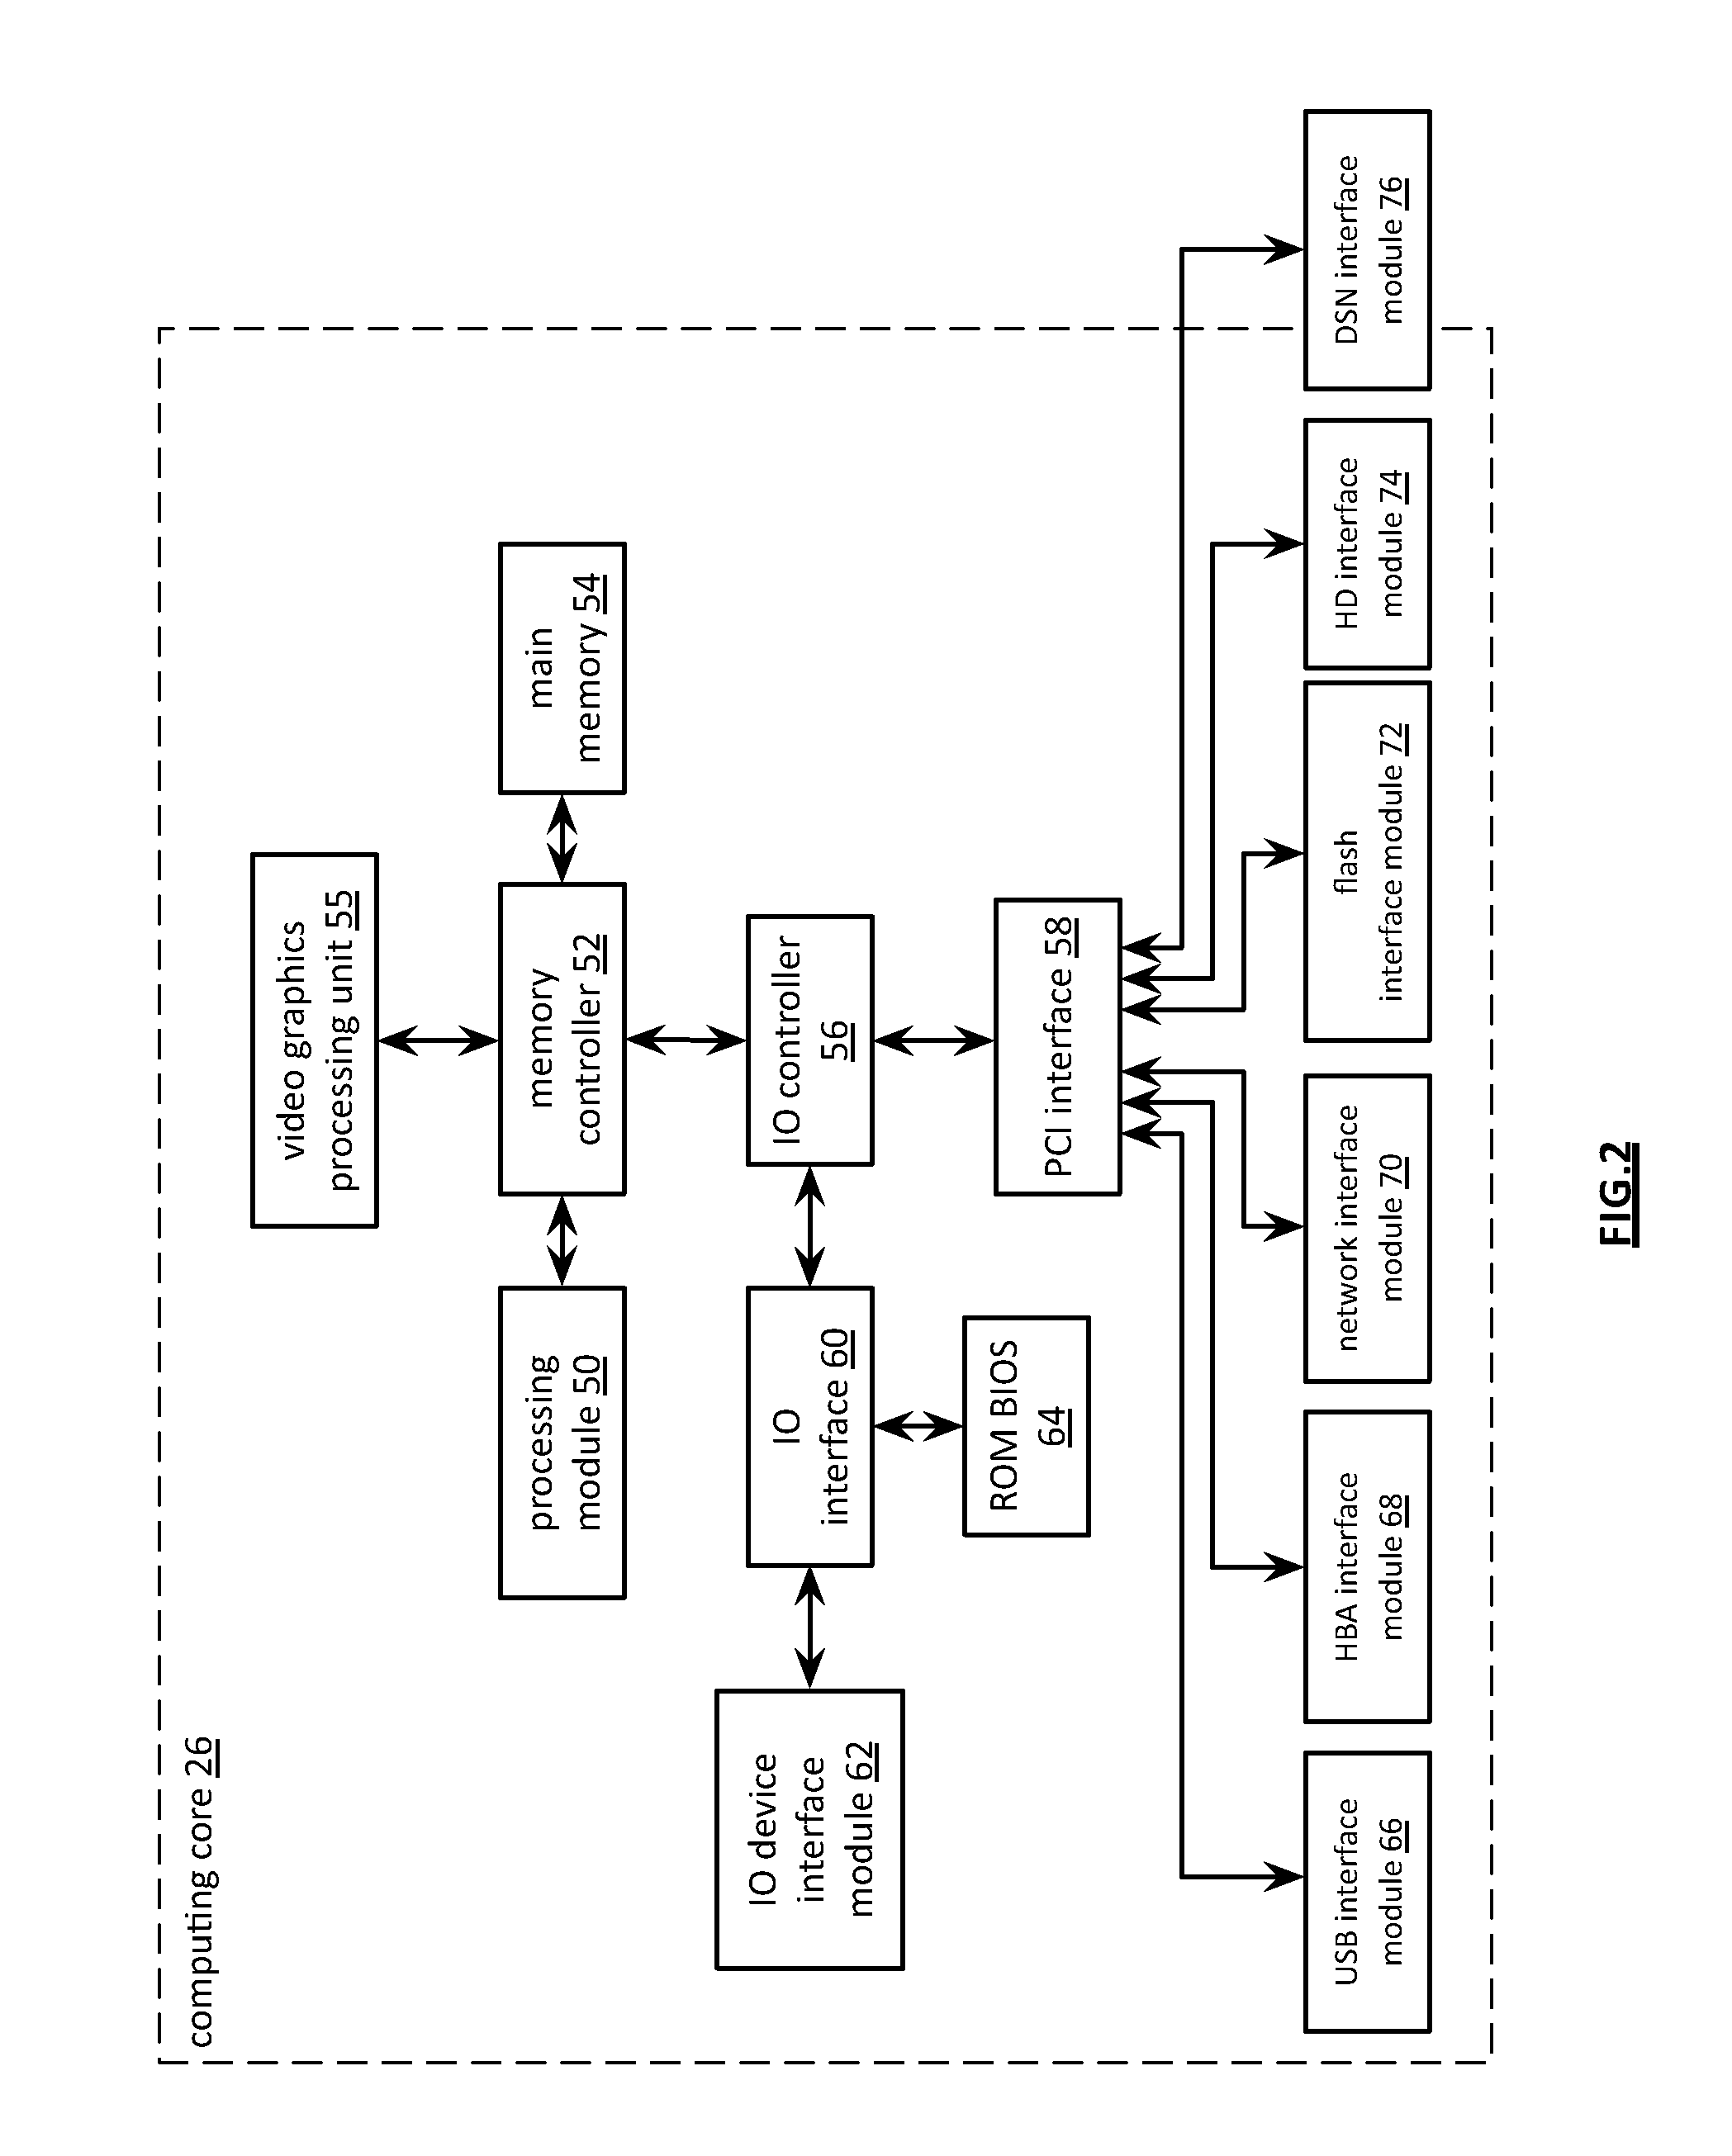 Storage and retrieval of required slices in a dispersed storage network